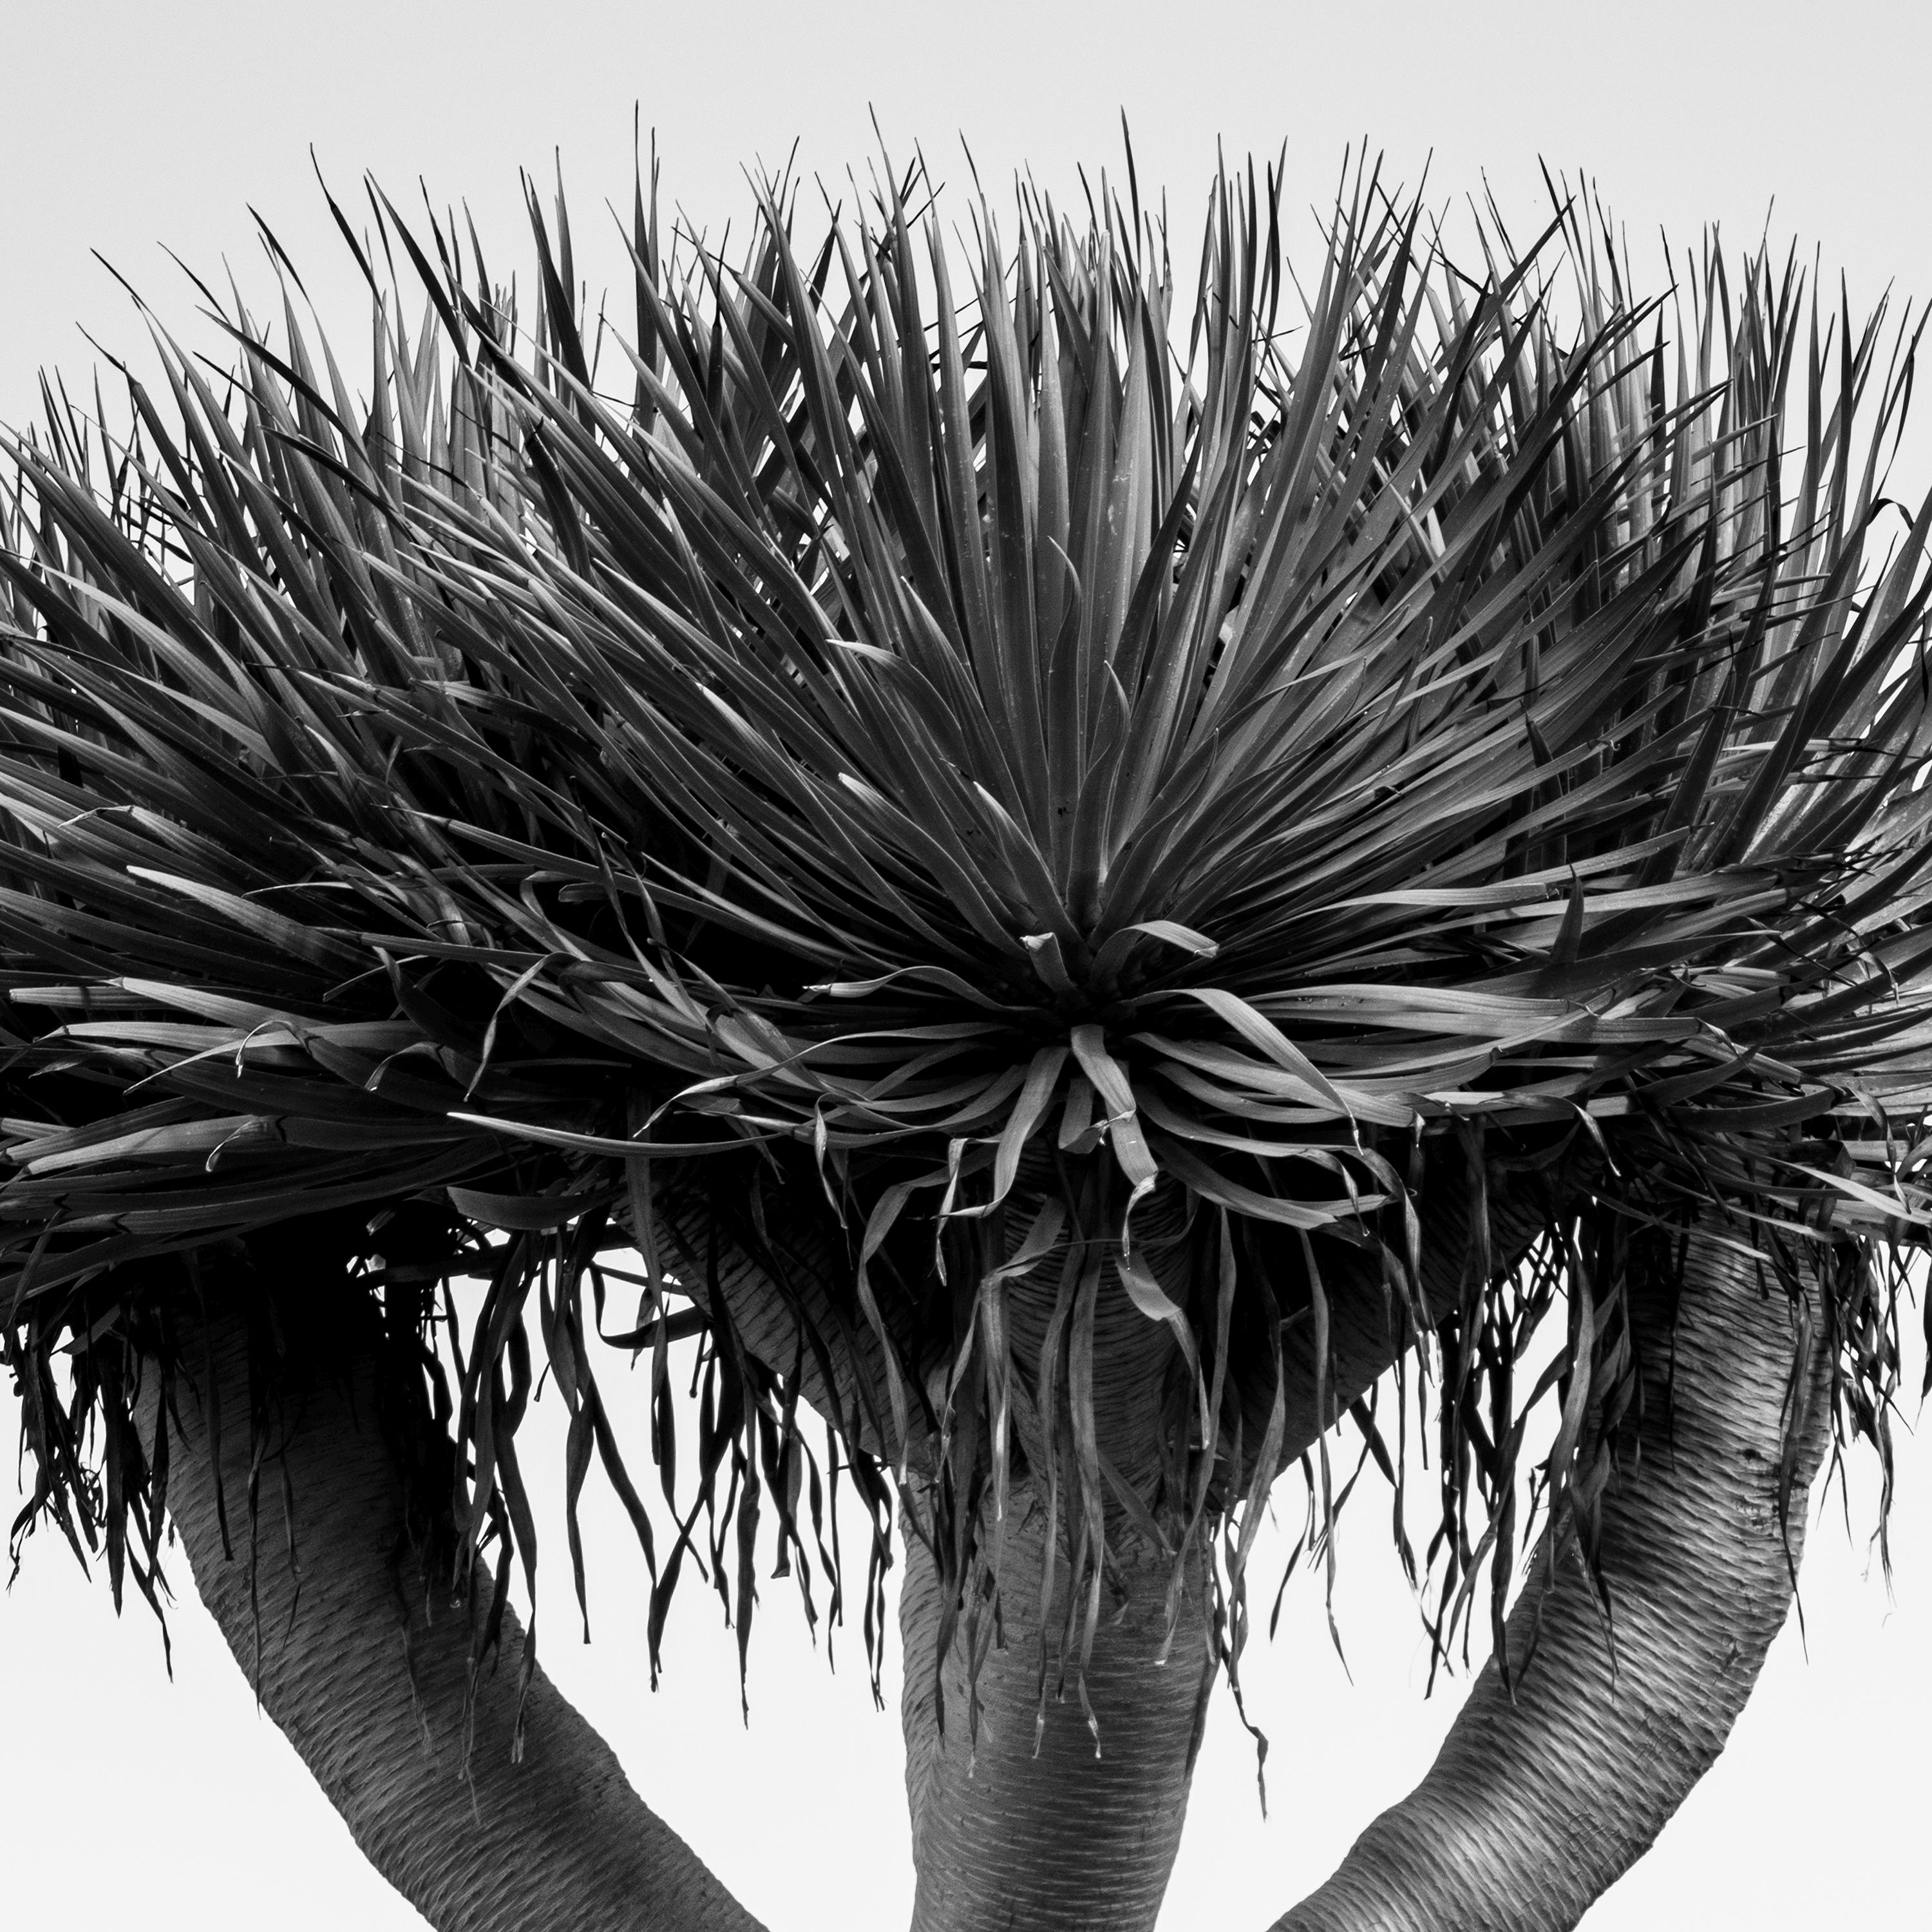 Canary Islands Dragon Tree Madeira Black and White Fine Art Landscape Photograph For Sale 8